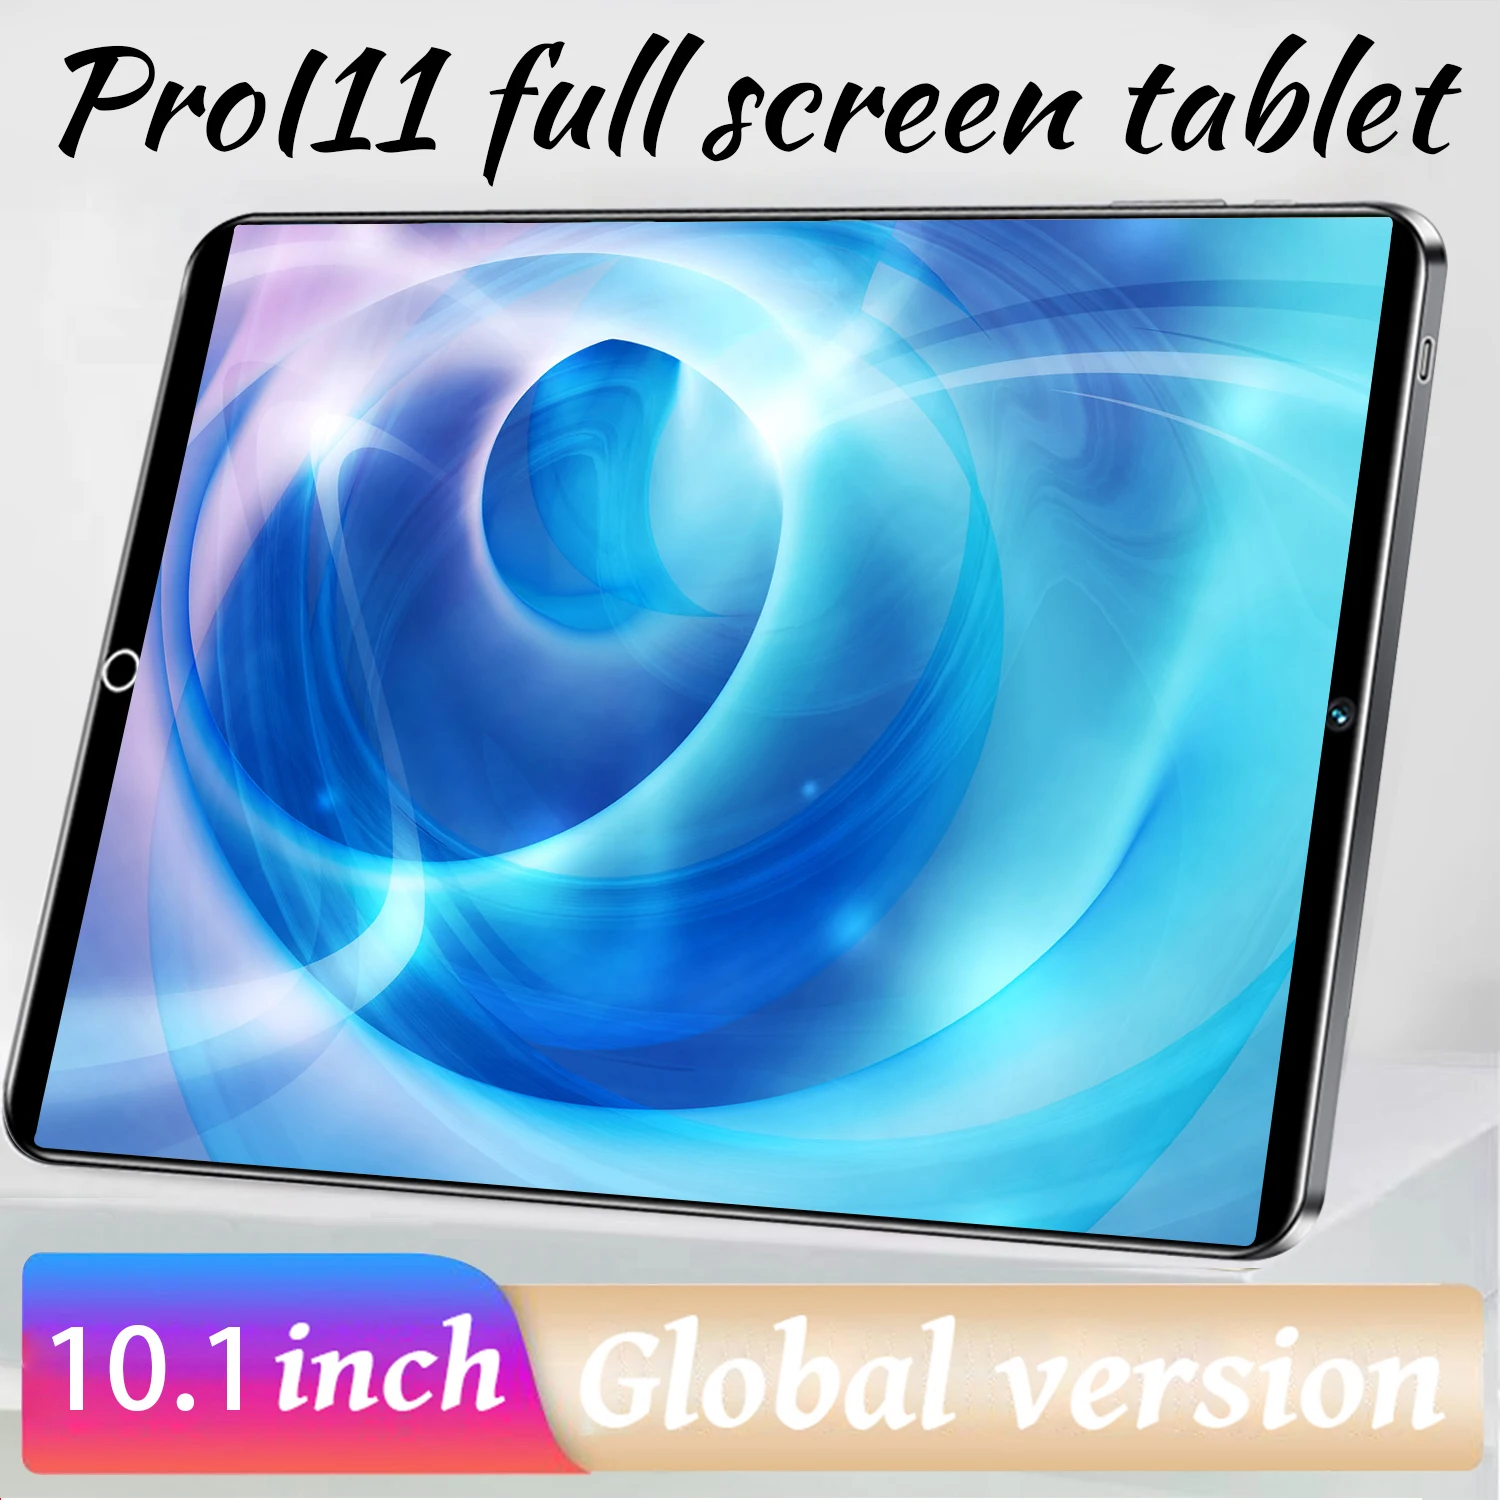 2023 Global New i11 Pro Tablet 10.1-inch Tablet Network 2GB RAM 32B ROM Wifi 8-core Android 6 3500mAh